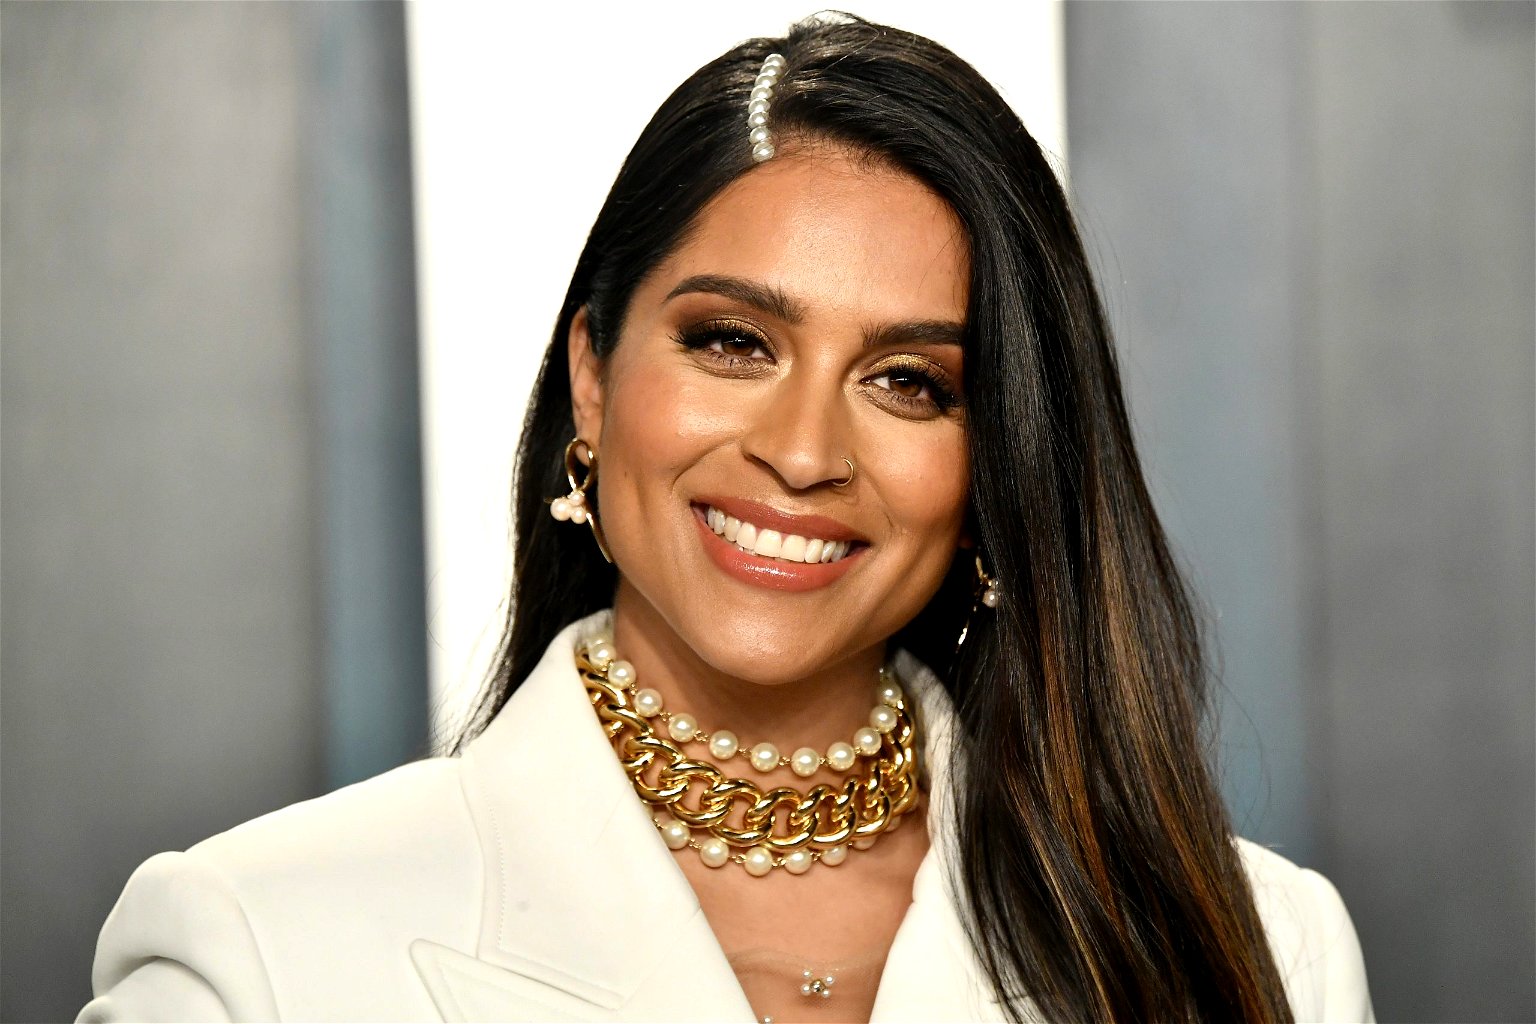 Lilly Singh Makes History as the First Queer Asian to Host a Late-Night TV Show